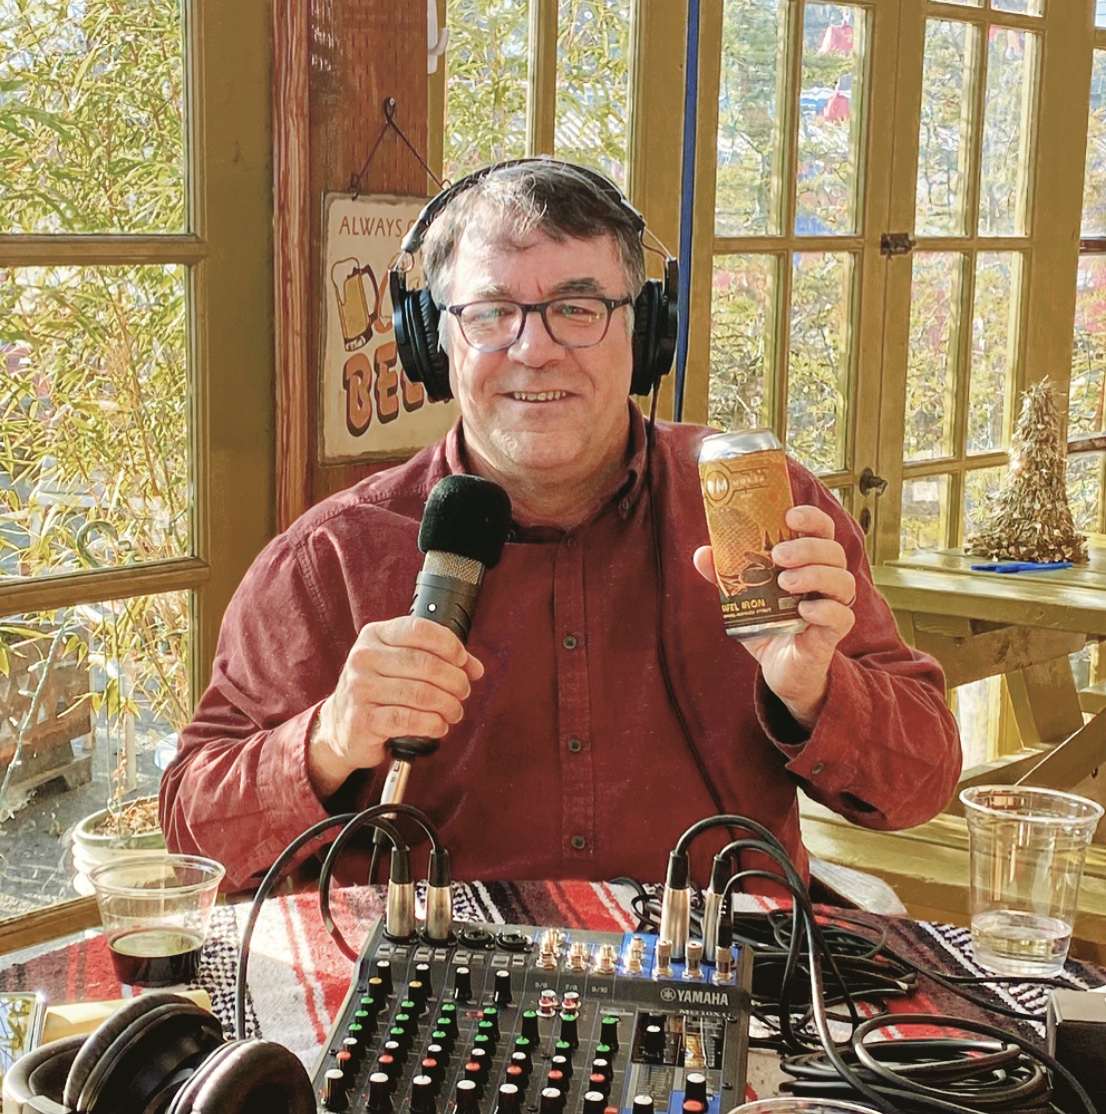 In this episode of The Craft Beer Podcast our Host Steven Shomler visits with Andre Meunier the Oregonian Craft Beer Writer. Andre shares his perspective on the Portland, Oregon craft beer scene, and he discusses his 2019 Portland brewery of the year - Ruse Brewing!